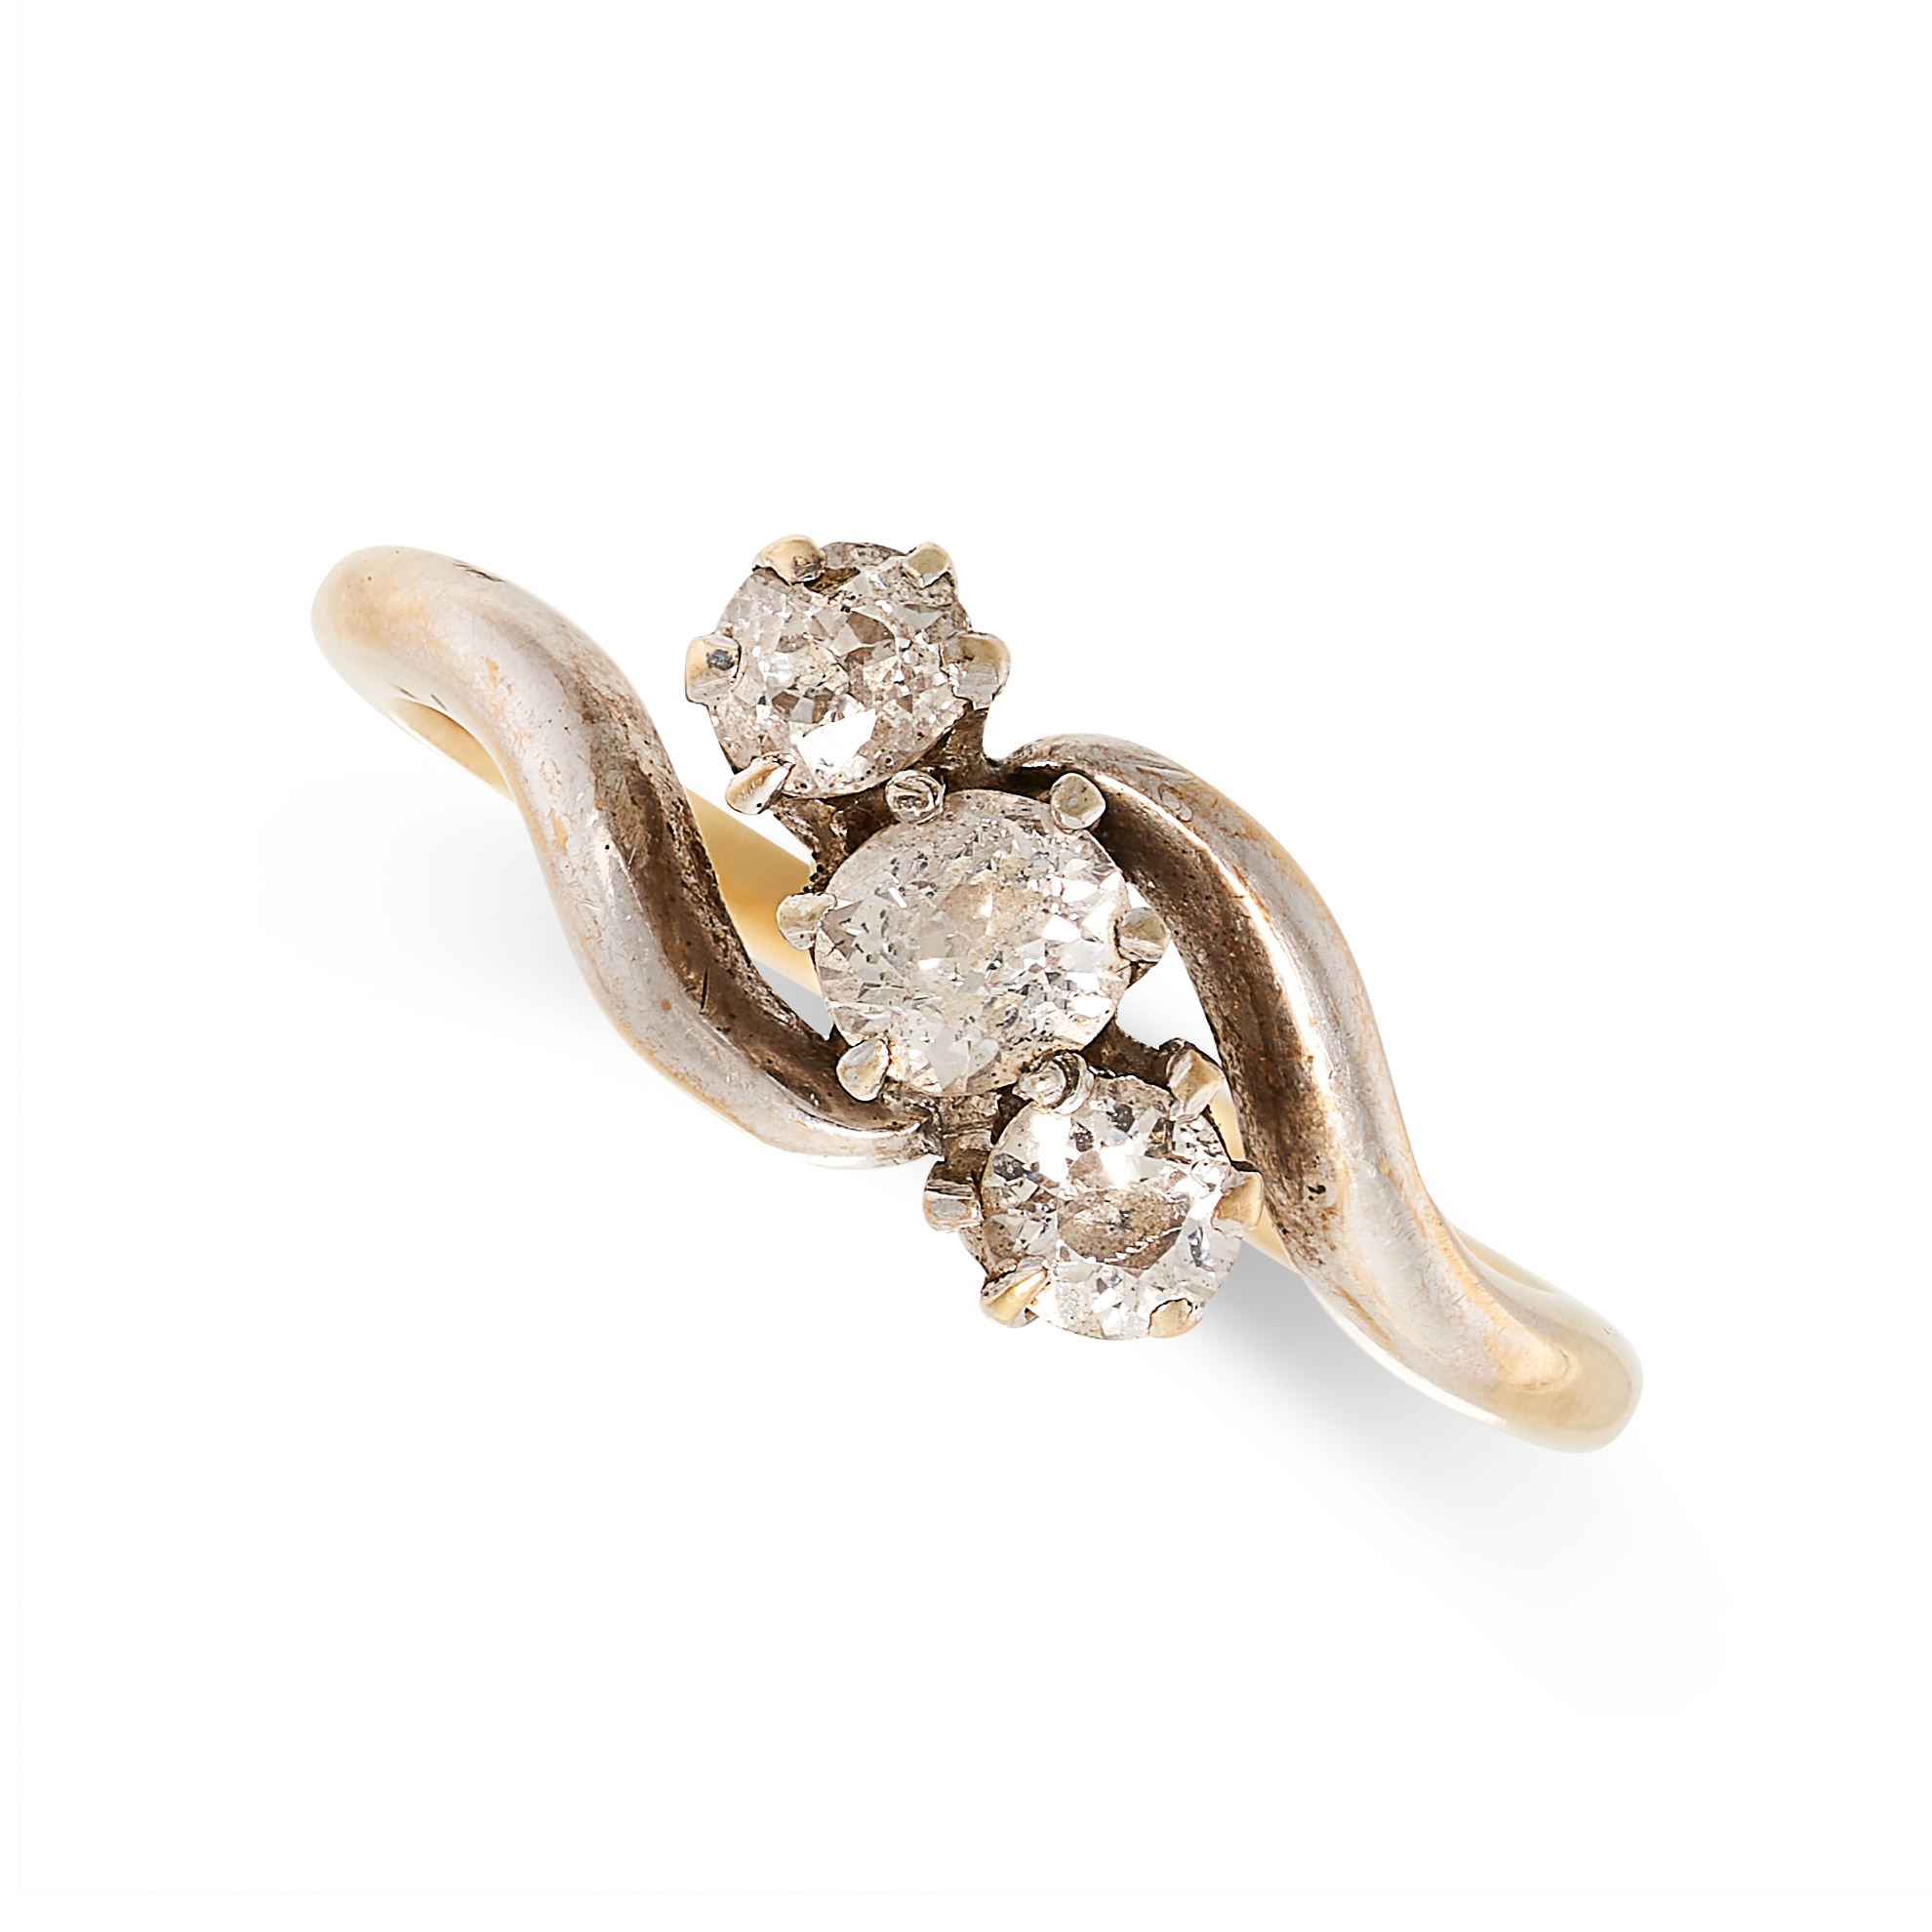 NO RESERVE - A DIAMOND THREE STONE RING, EARLY 20TH CENTURY in 18ct yellow gold and platinum, set